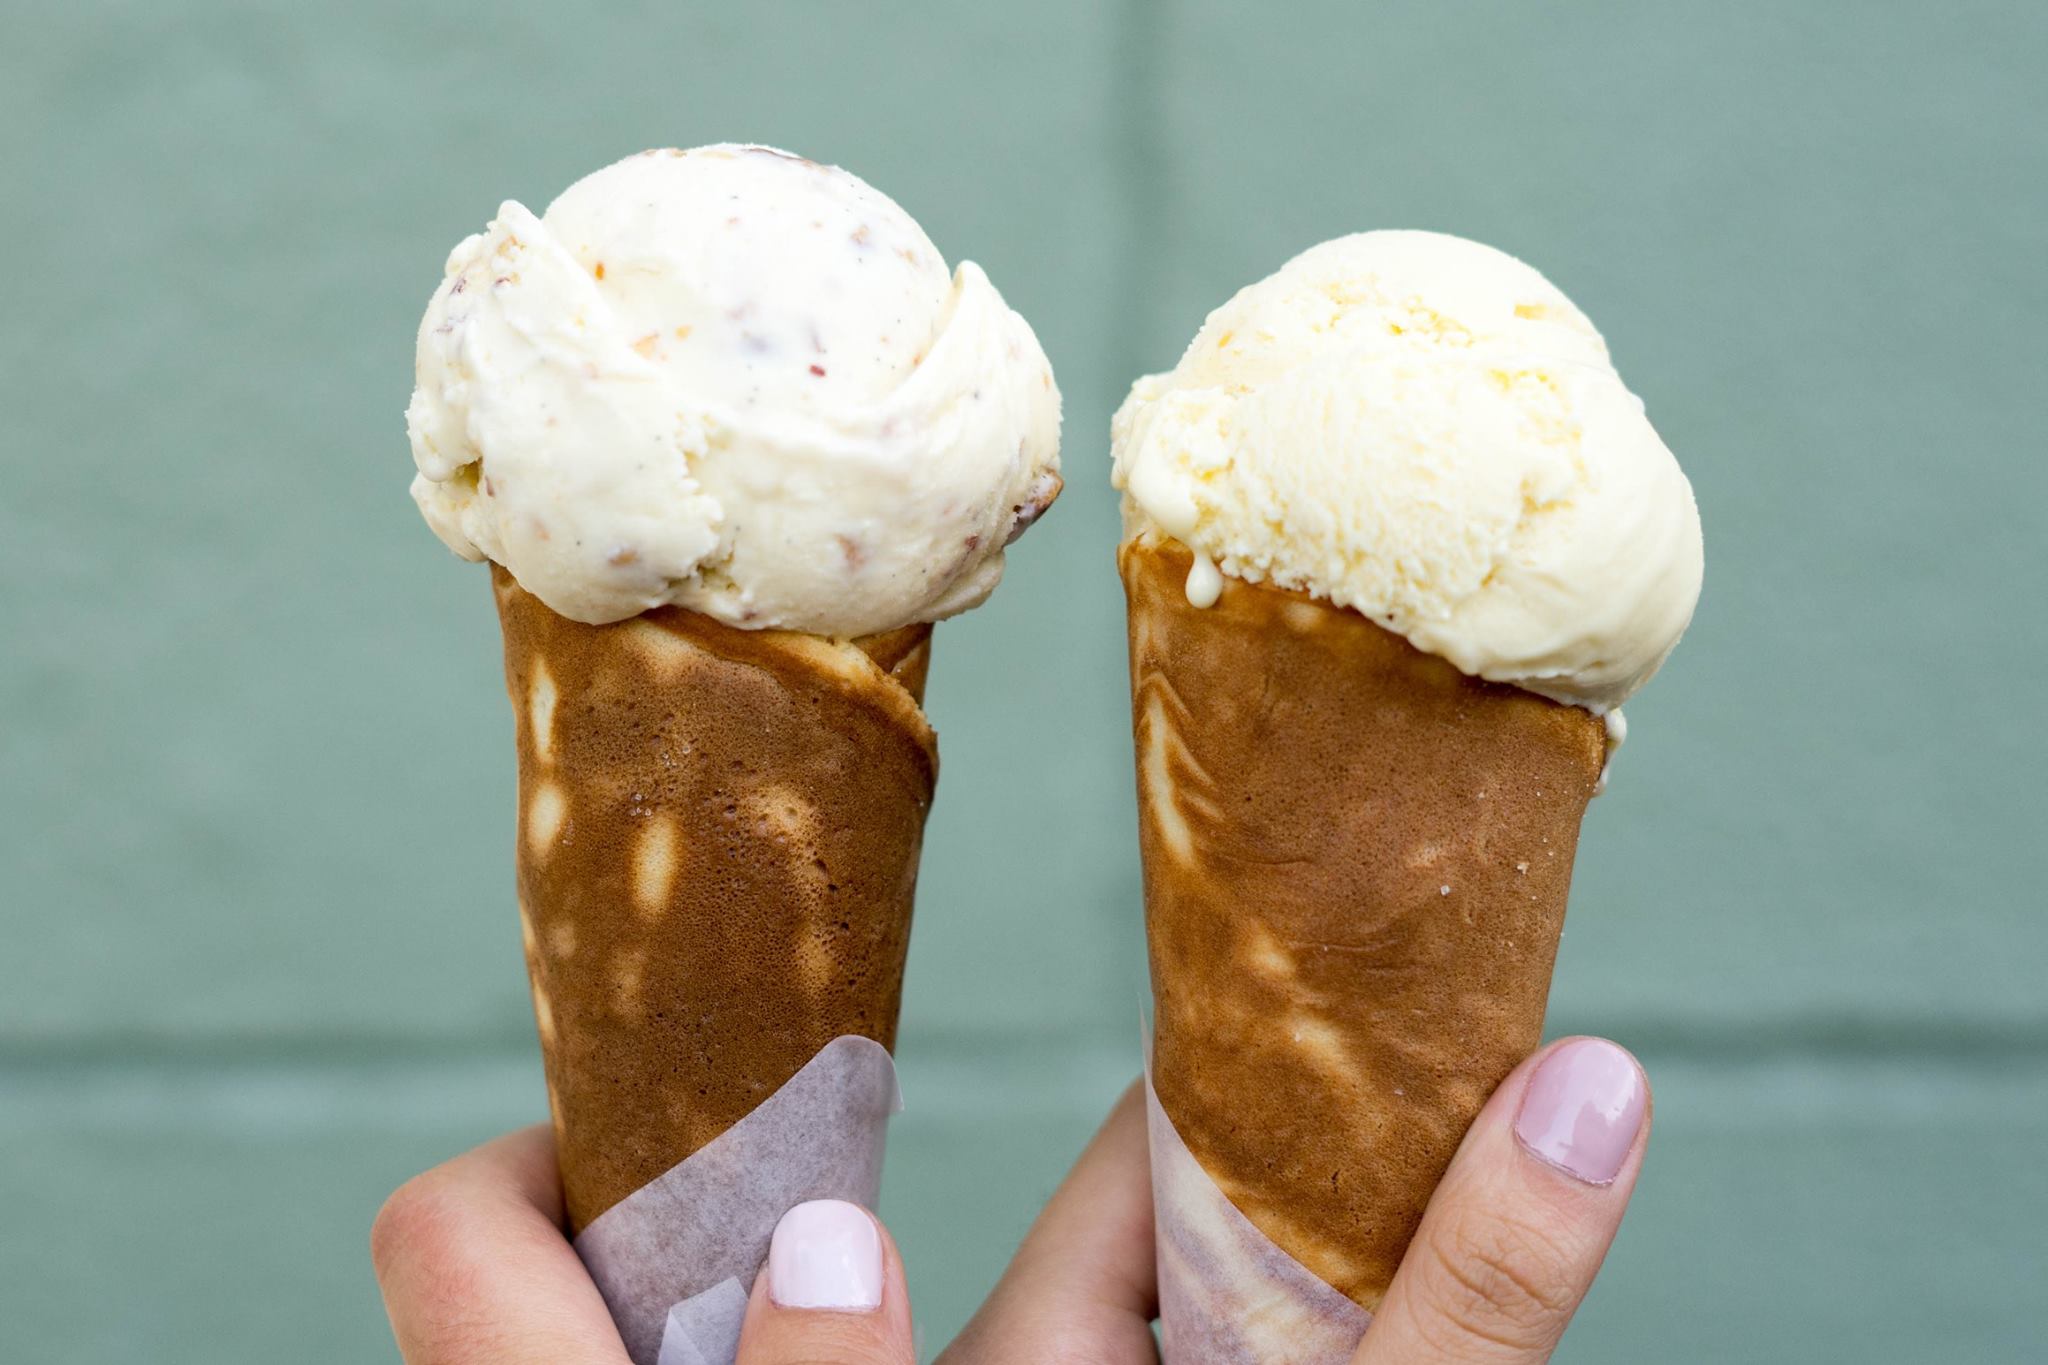 Two ice cream cones held side by side